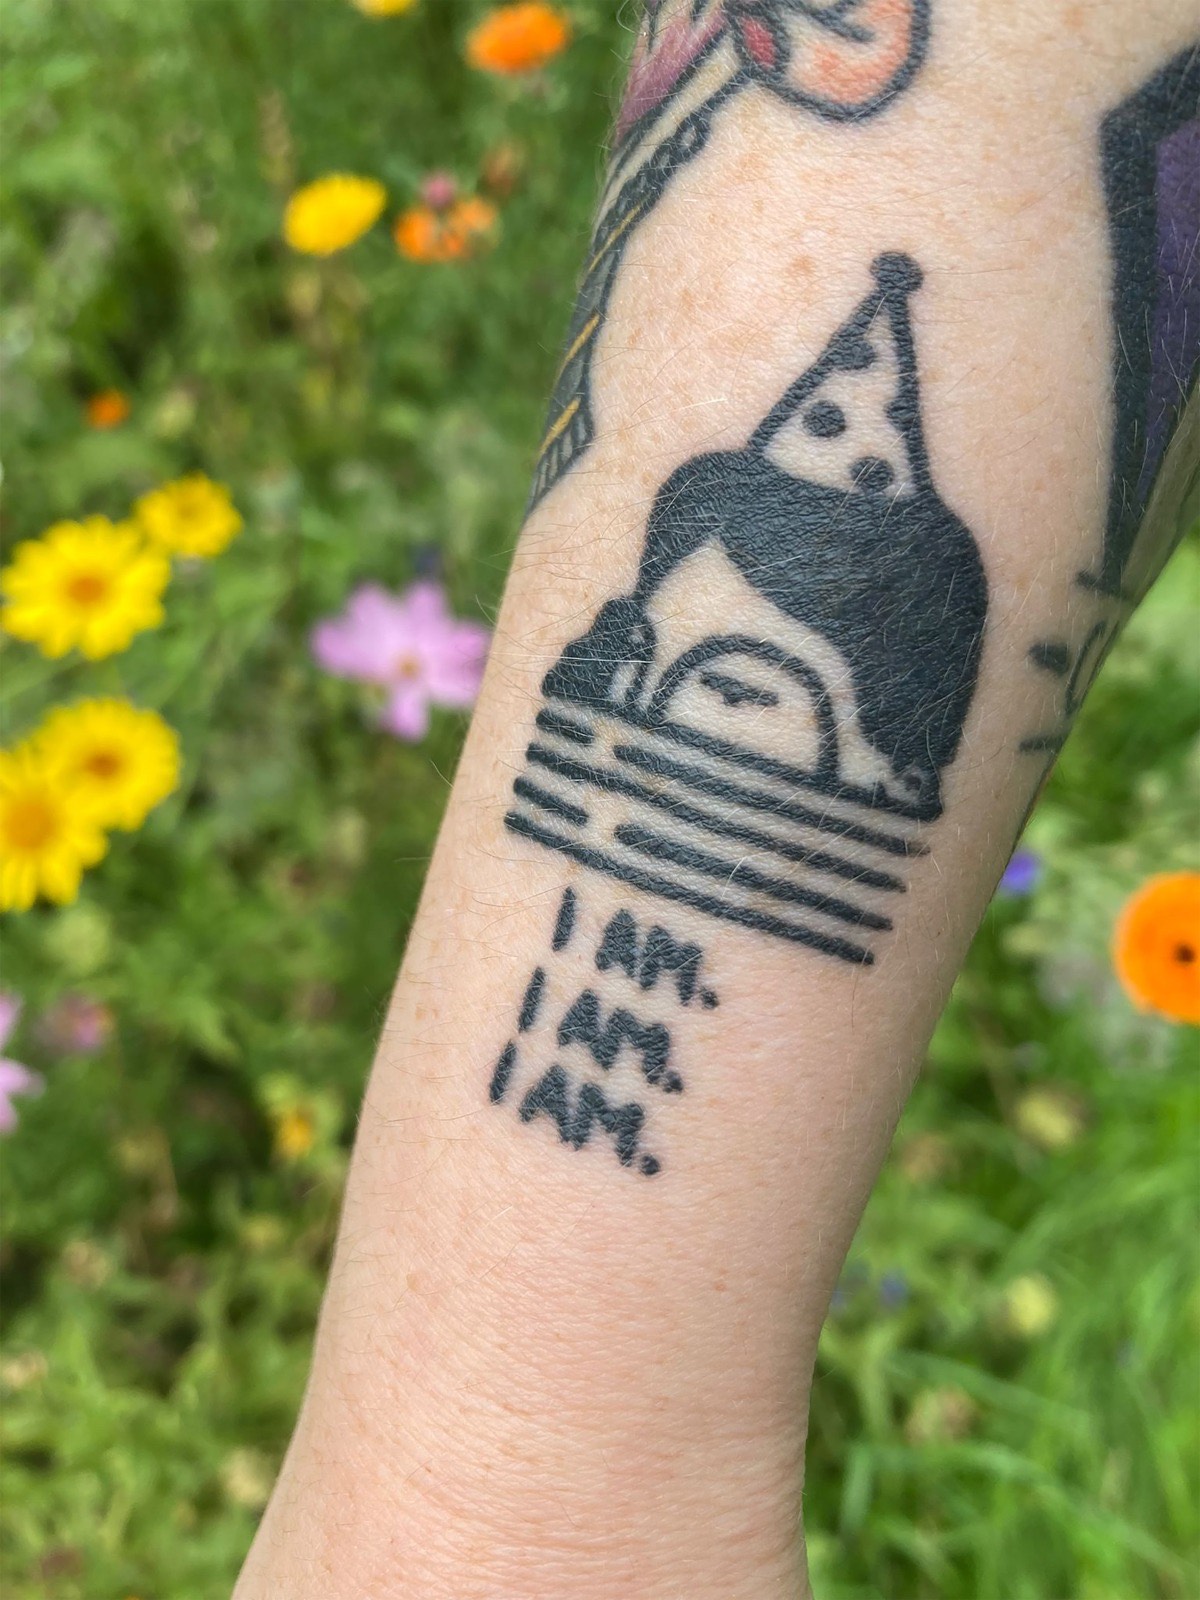 I got the worst tattoo and can't stop crying - I told the artist